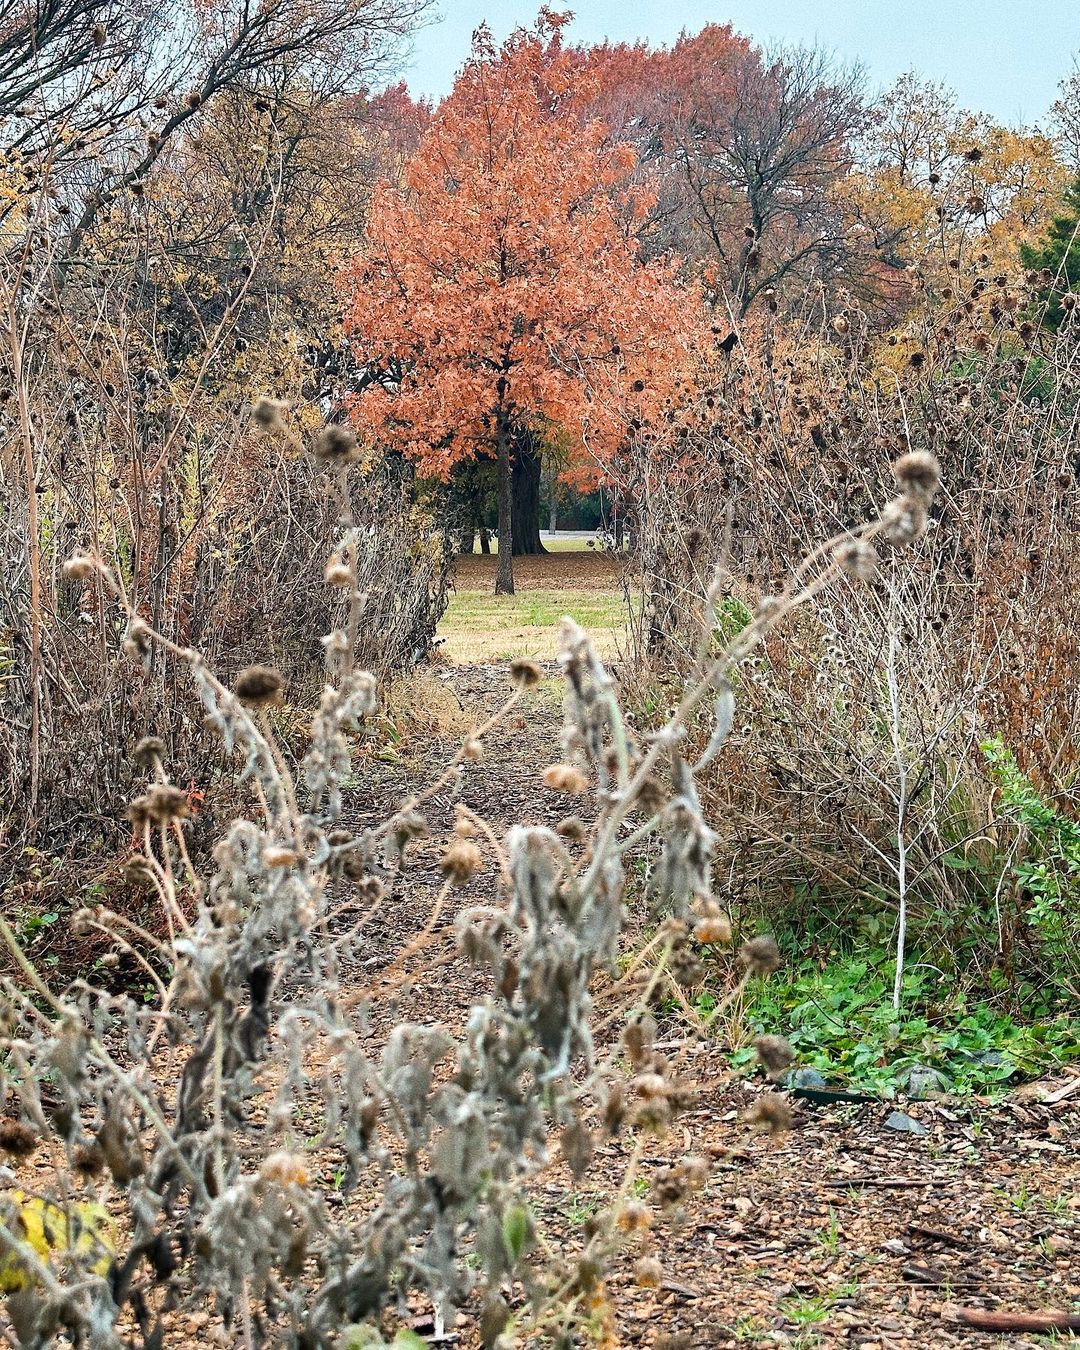 Looking down a path, close to ground, red oak tree in the distance, winter